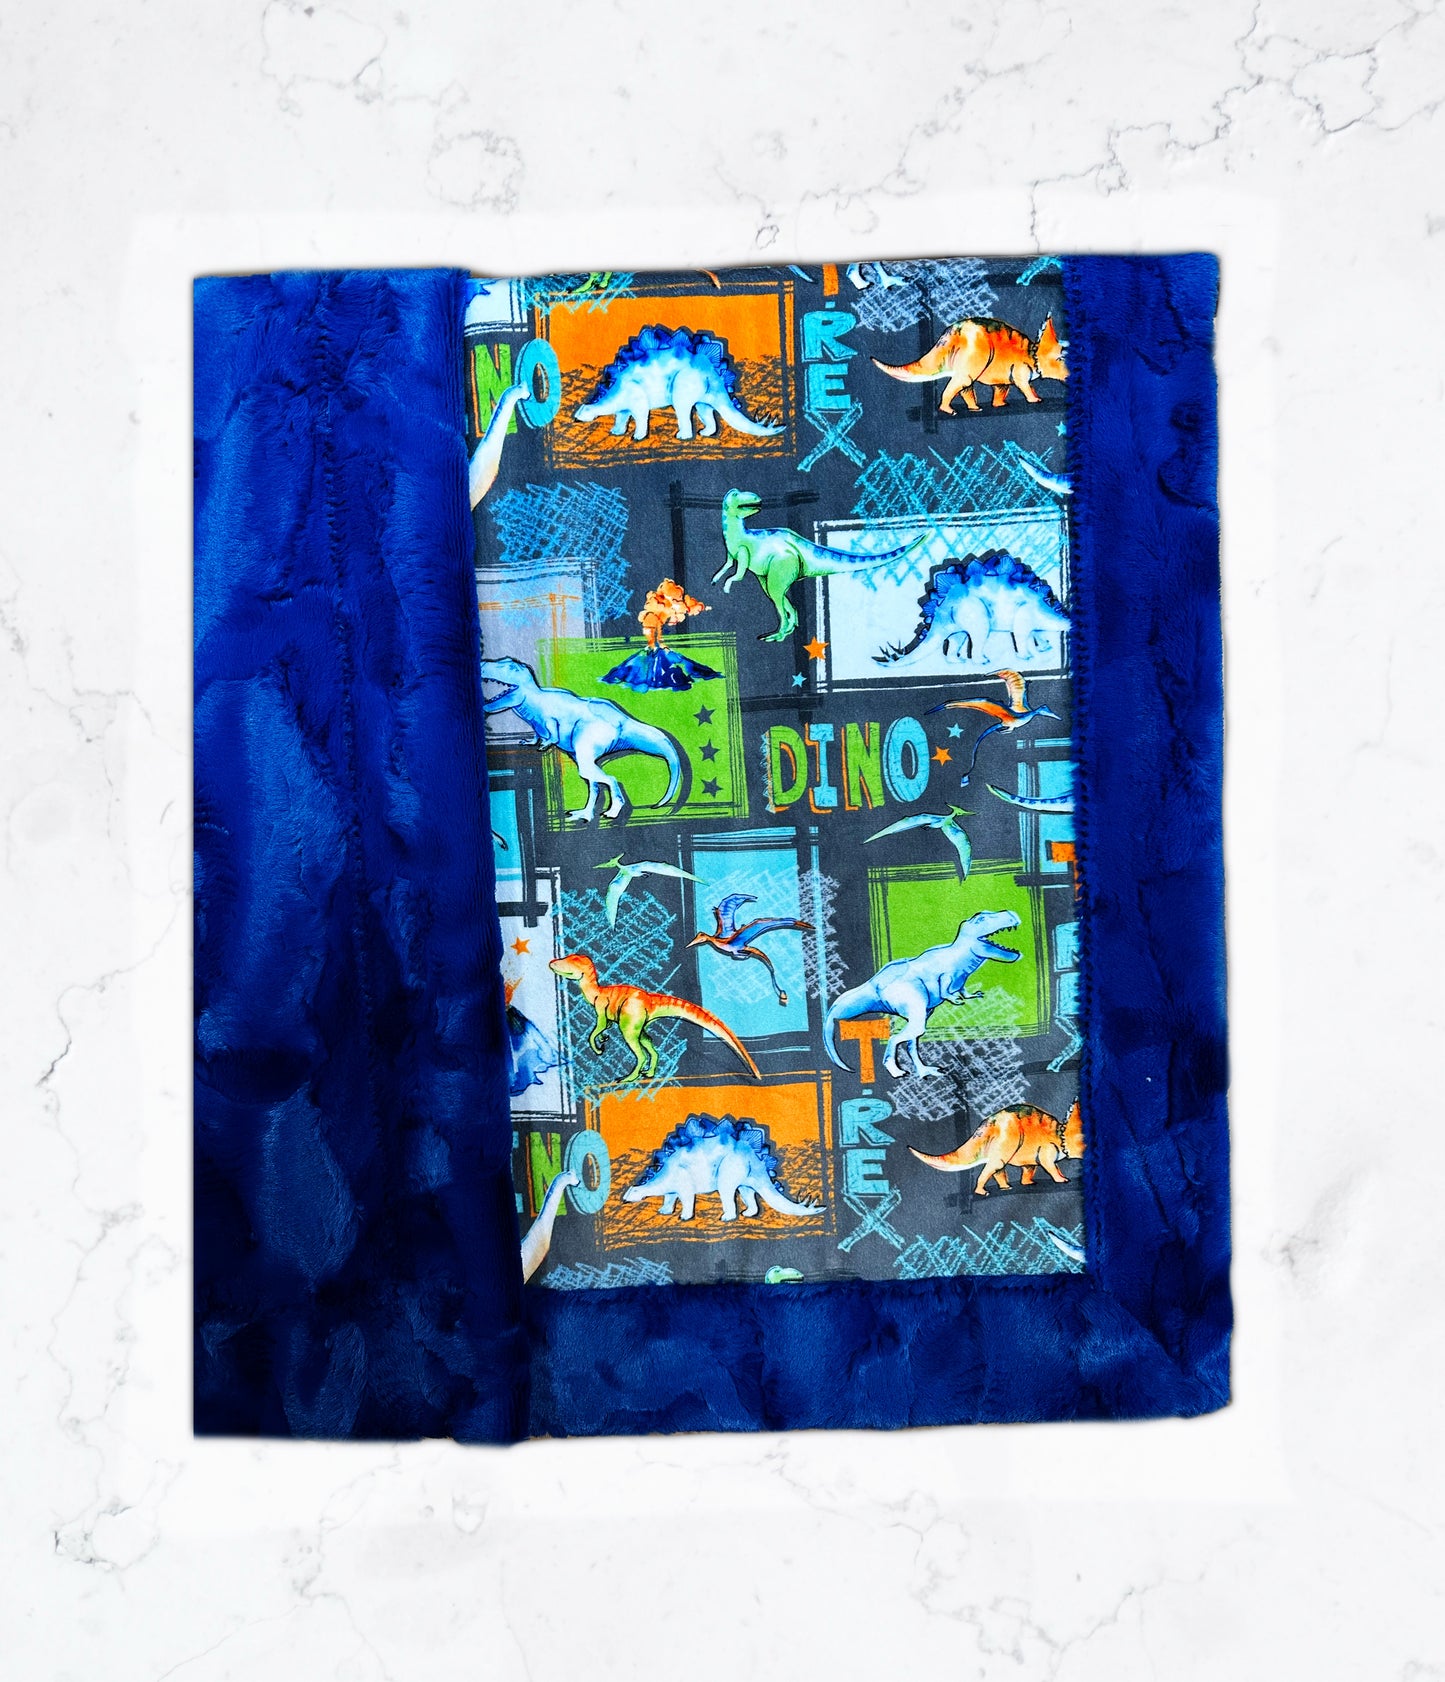 T-Rex Graphite on Royal Blue Hide Minky Toddler Blanket - Handcrafted Excellence - 45x55